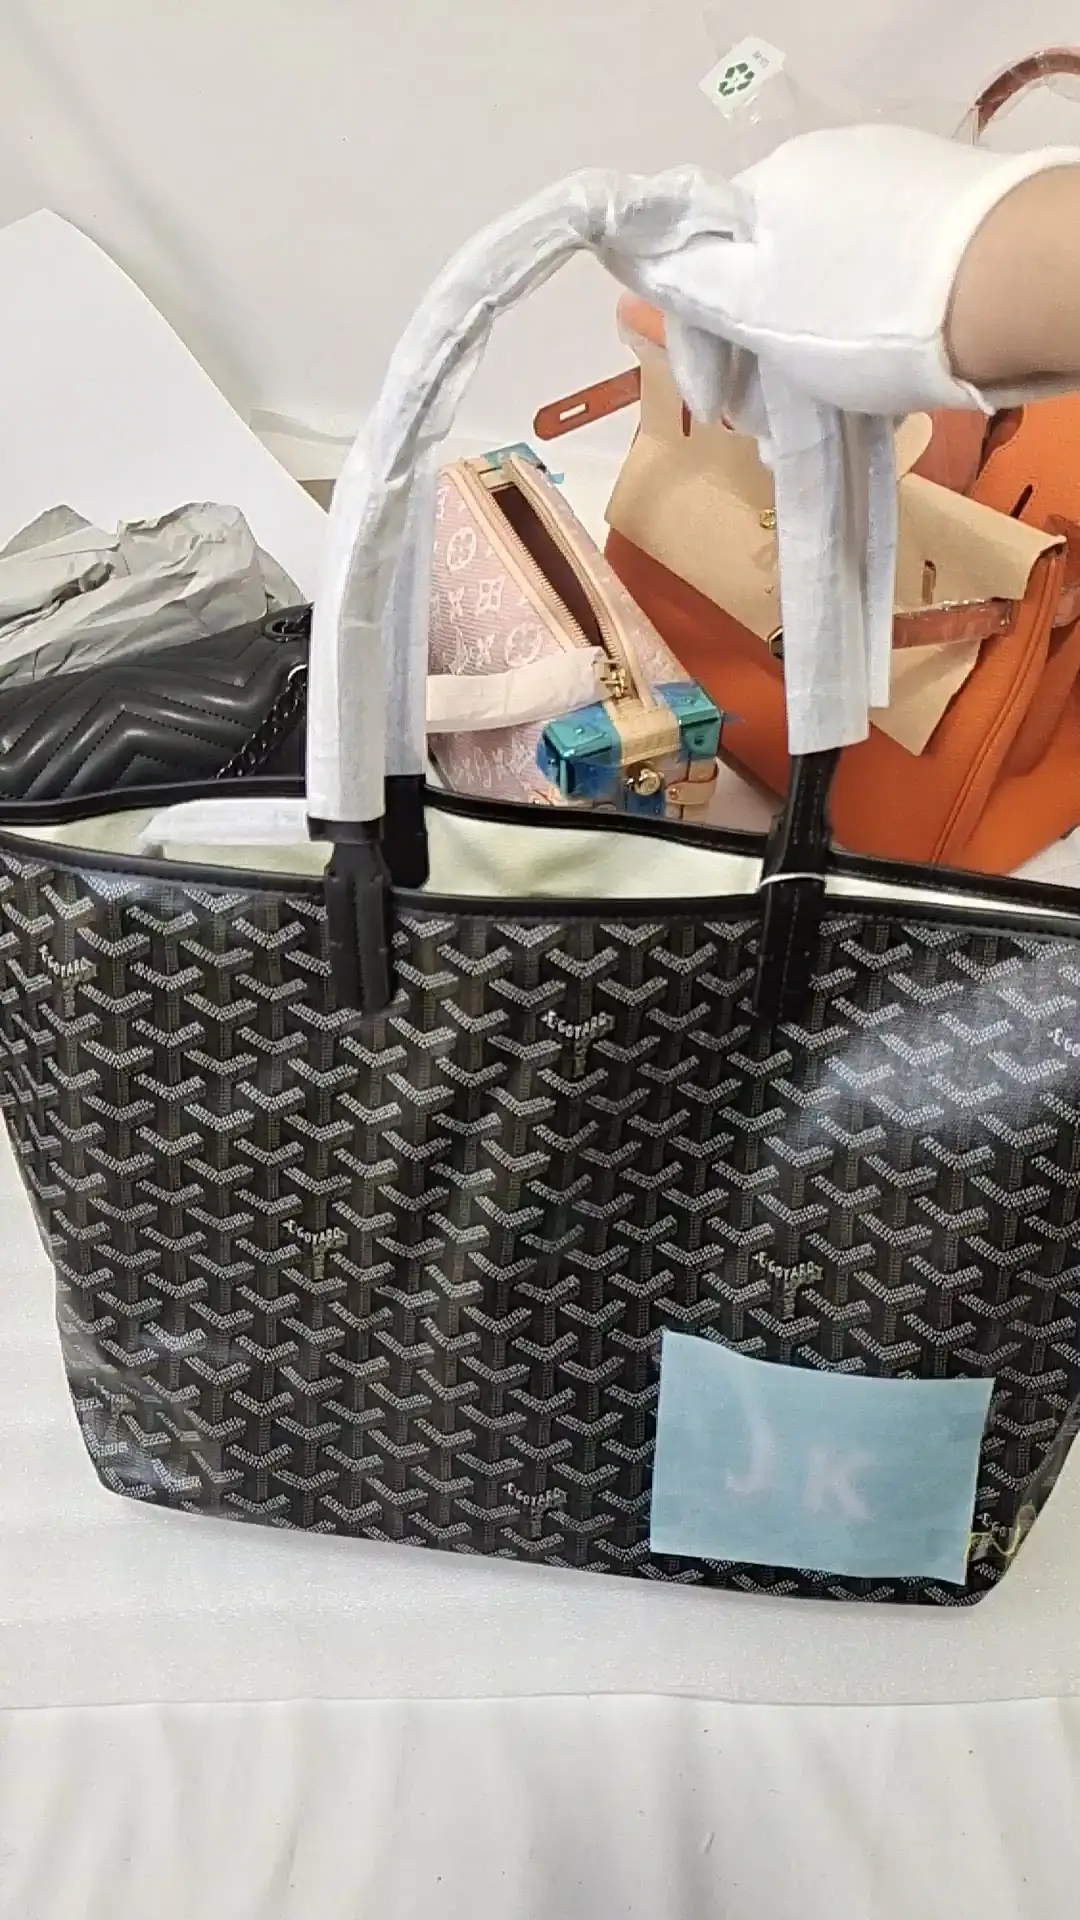 goyard bag,Excellent quality only costs 140 $🤩🤩🤩, Video published by  Vivian💗💗💗